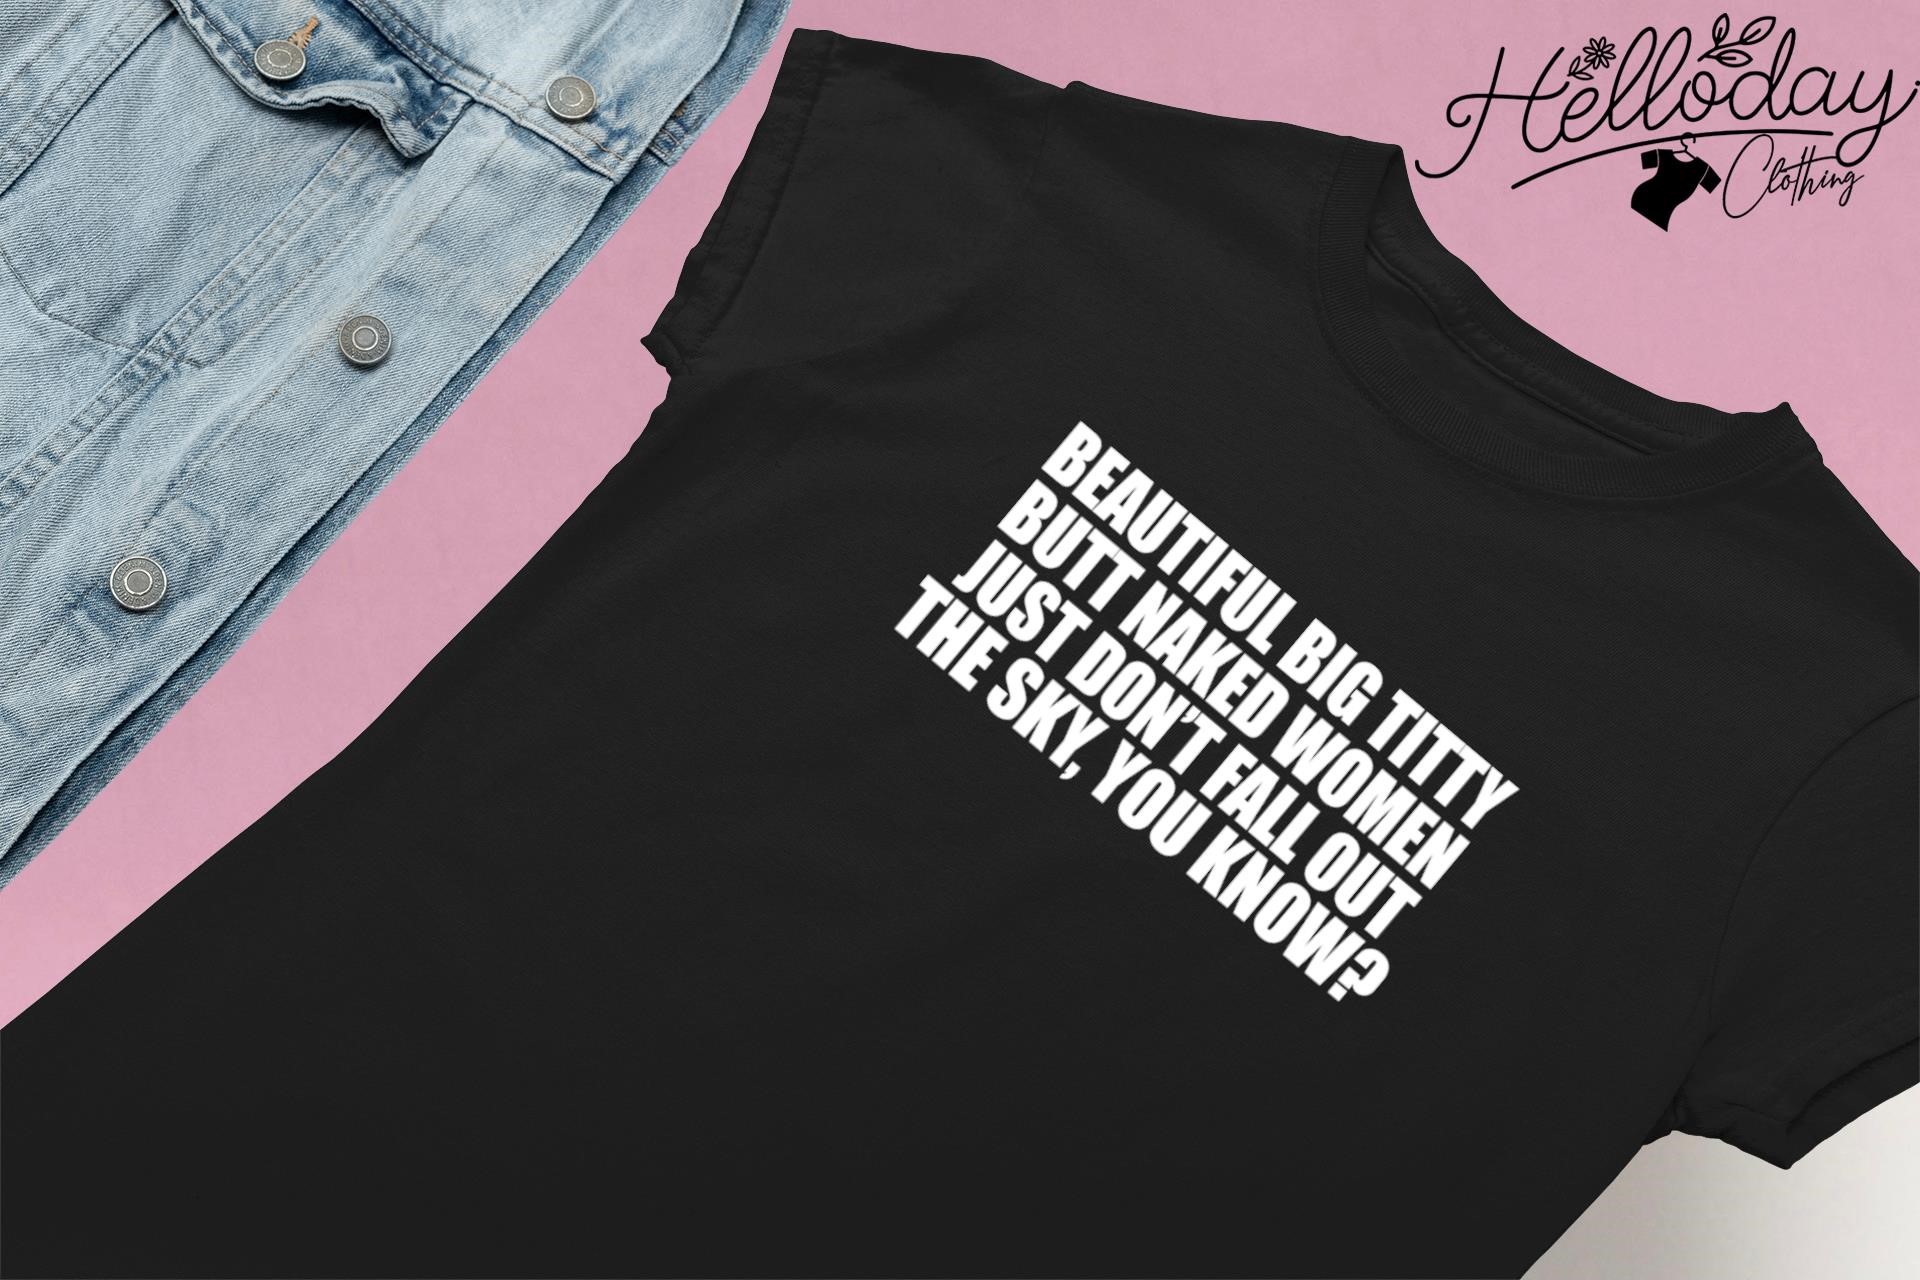 Beautiful Big Titty Butt Naked Women Just Dont Fall Out of The Sky You Know  Shirt